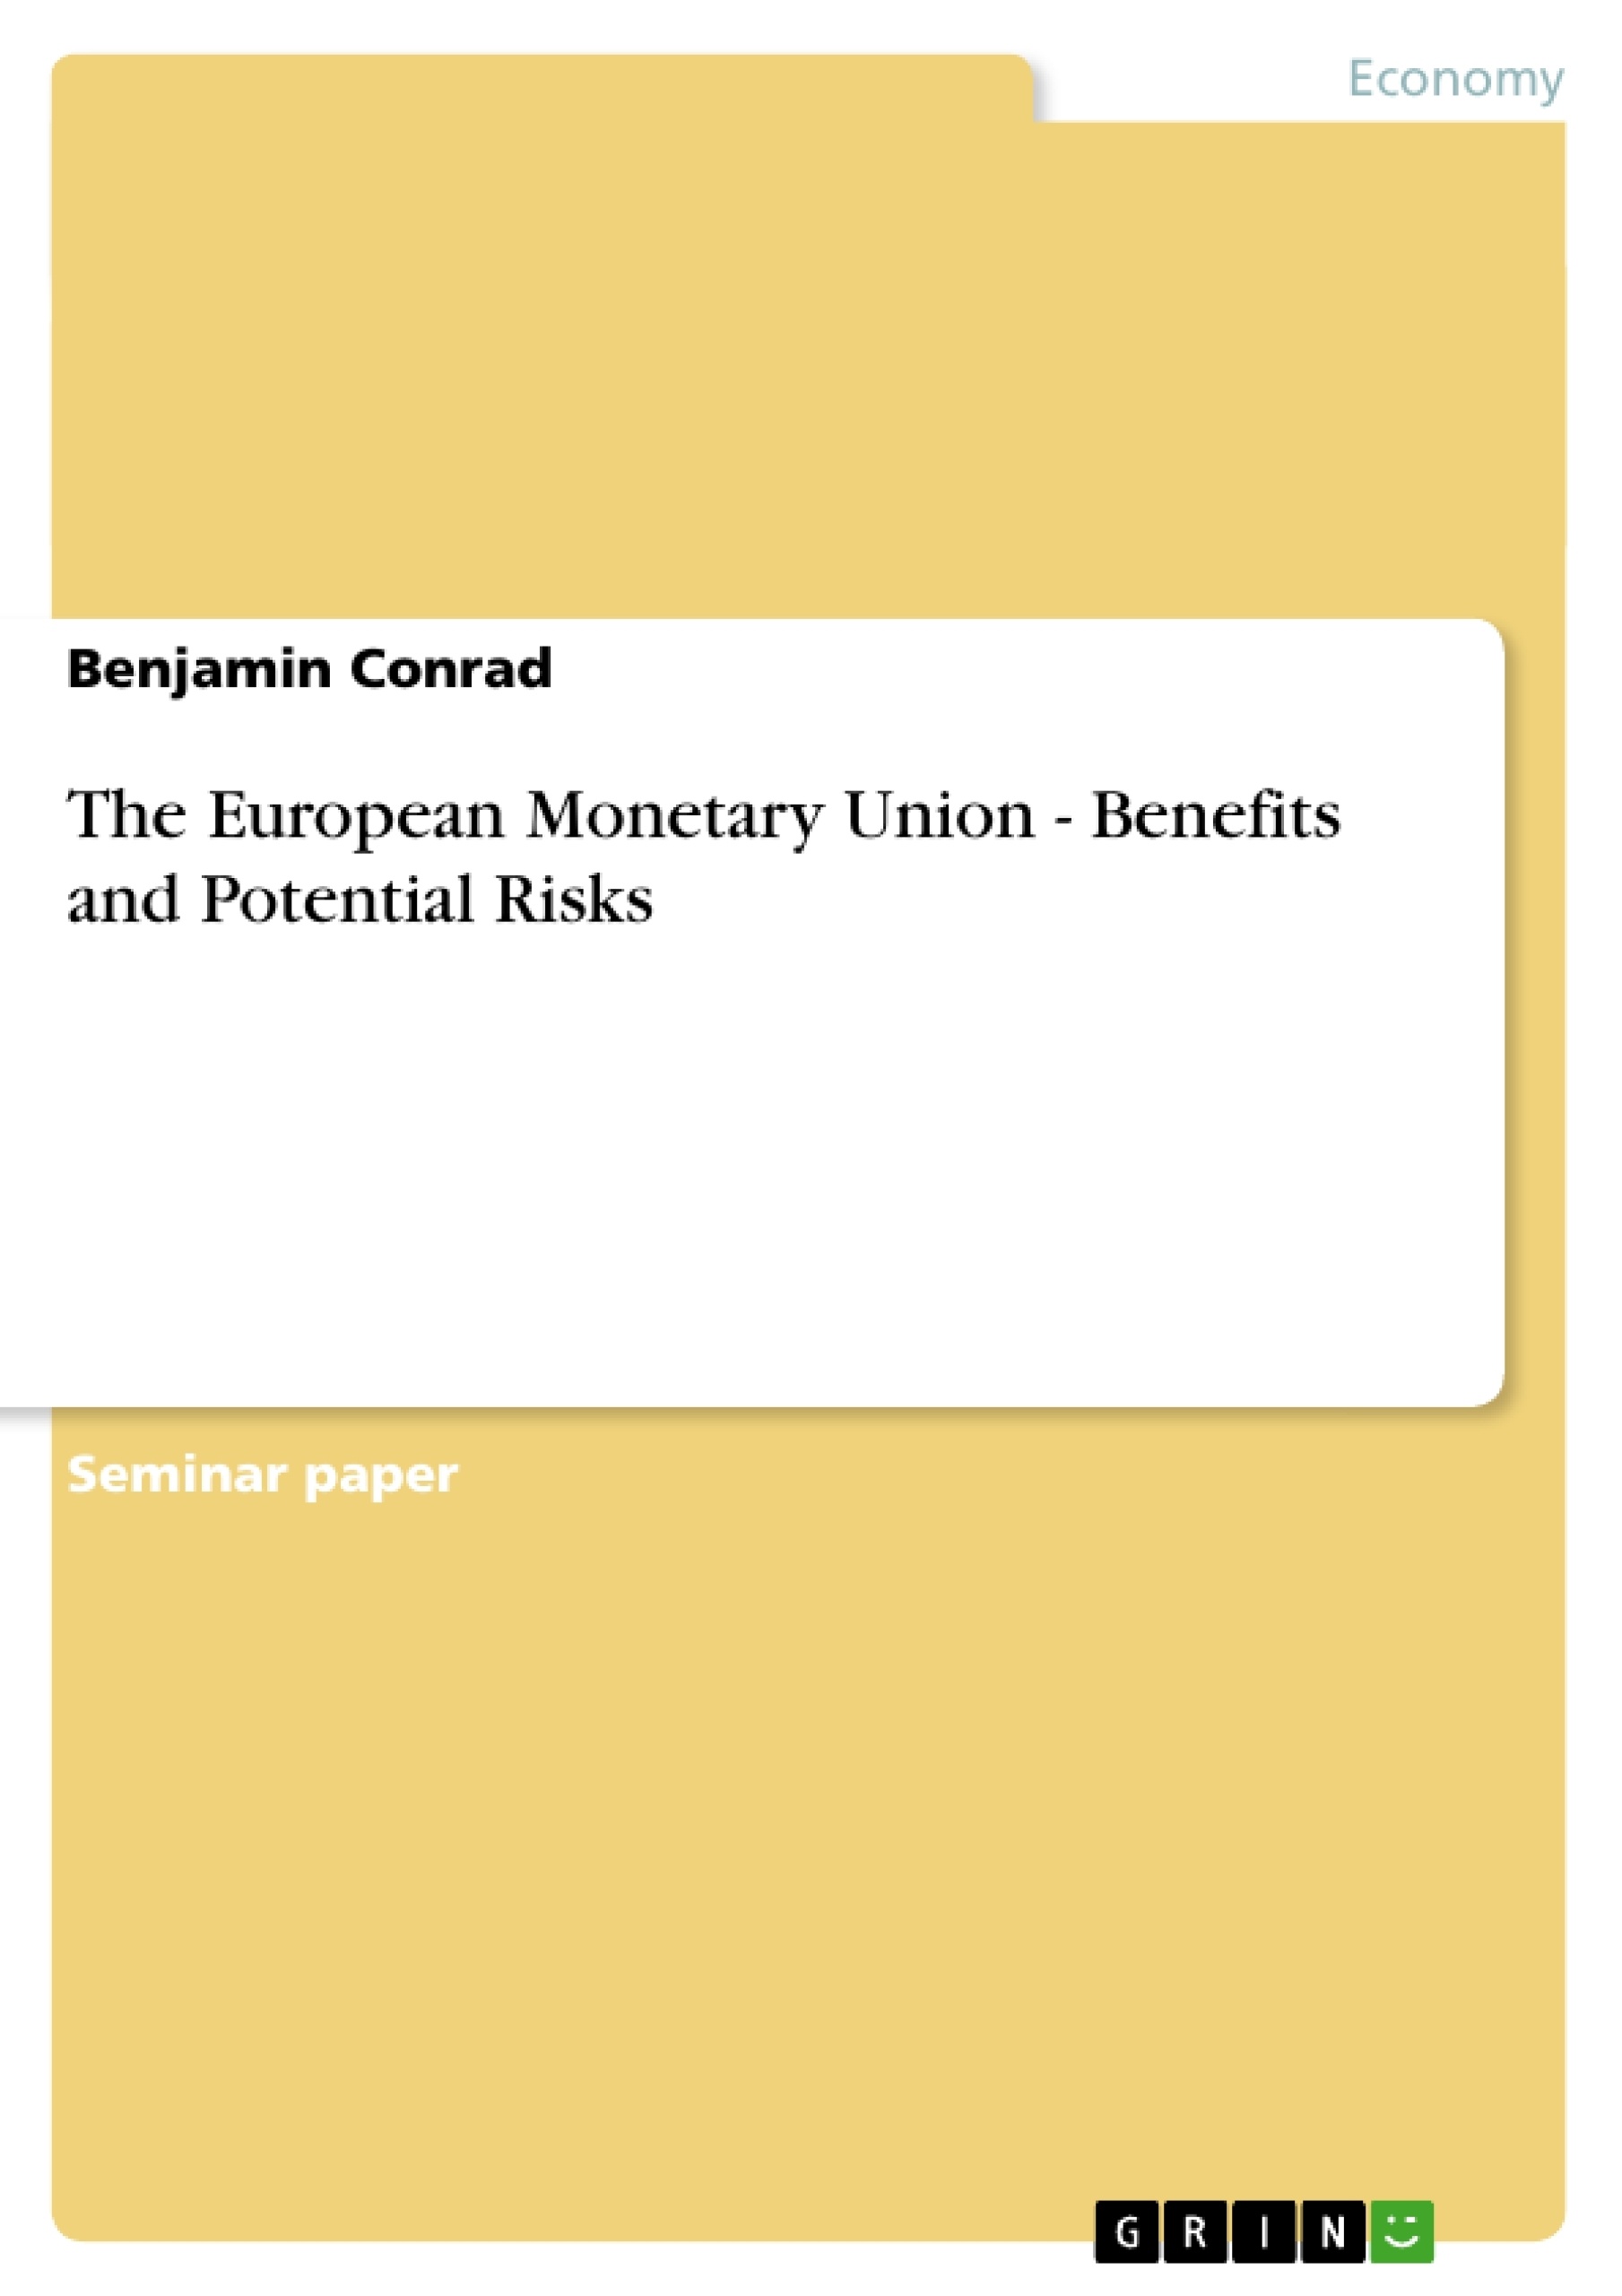 Título: The European Monetary Union - Benefits and Potential Risks